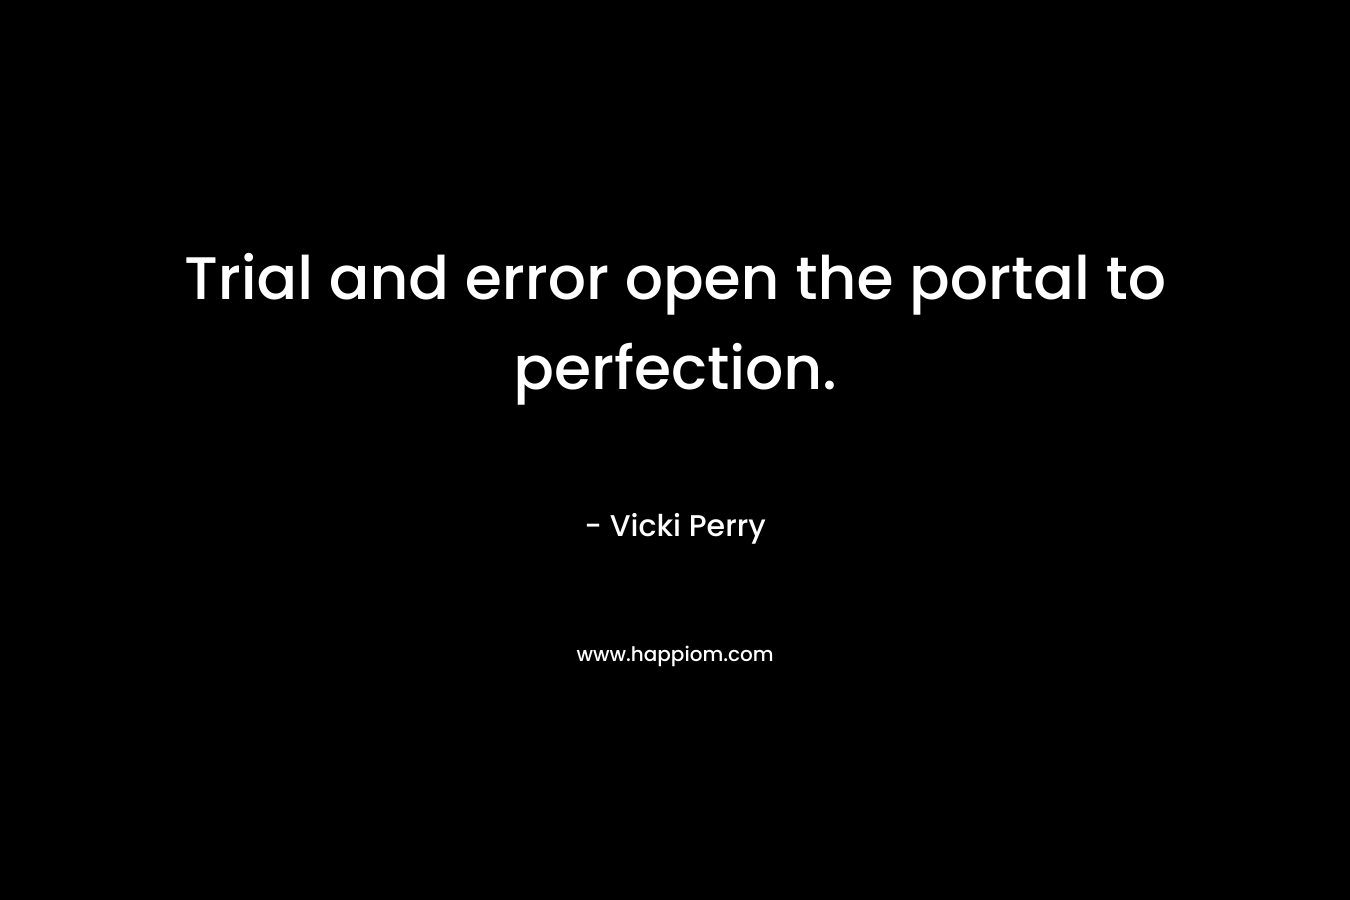 Trial and error open the portal to perfection. – Vicki Perry